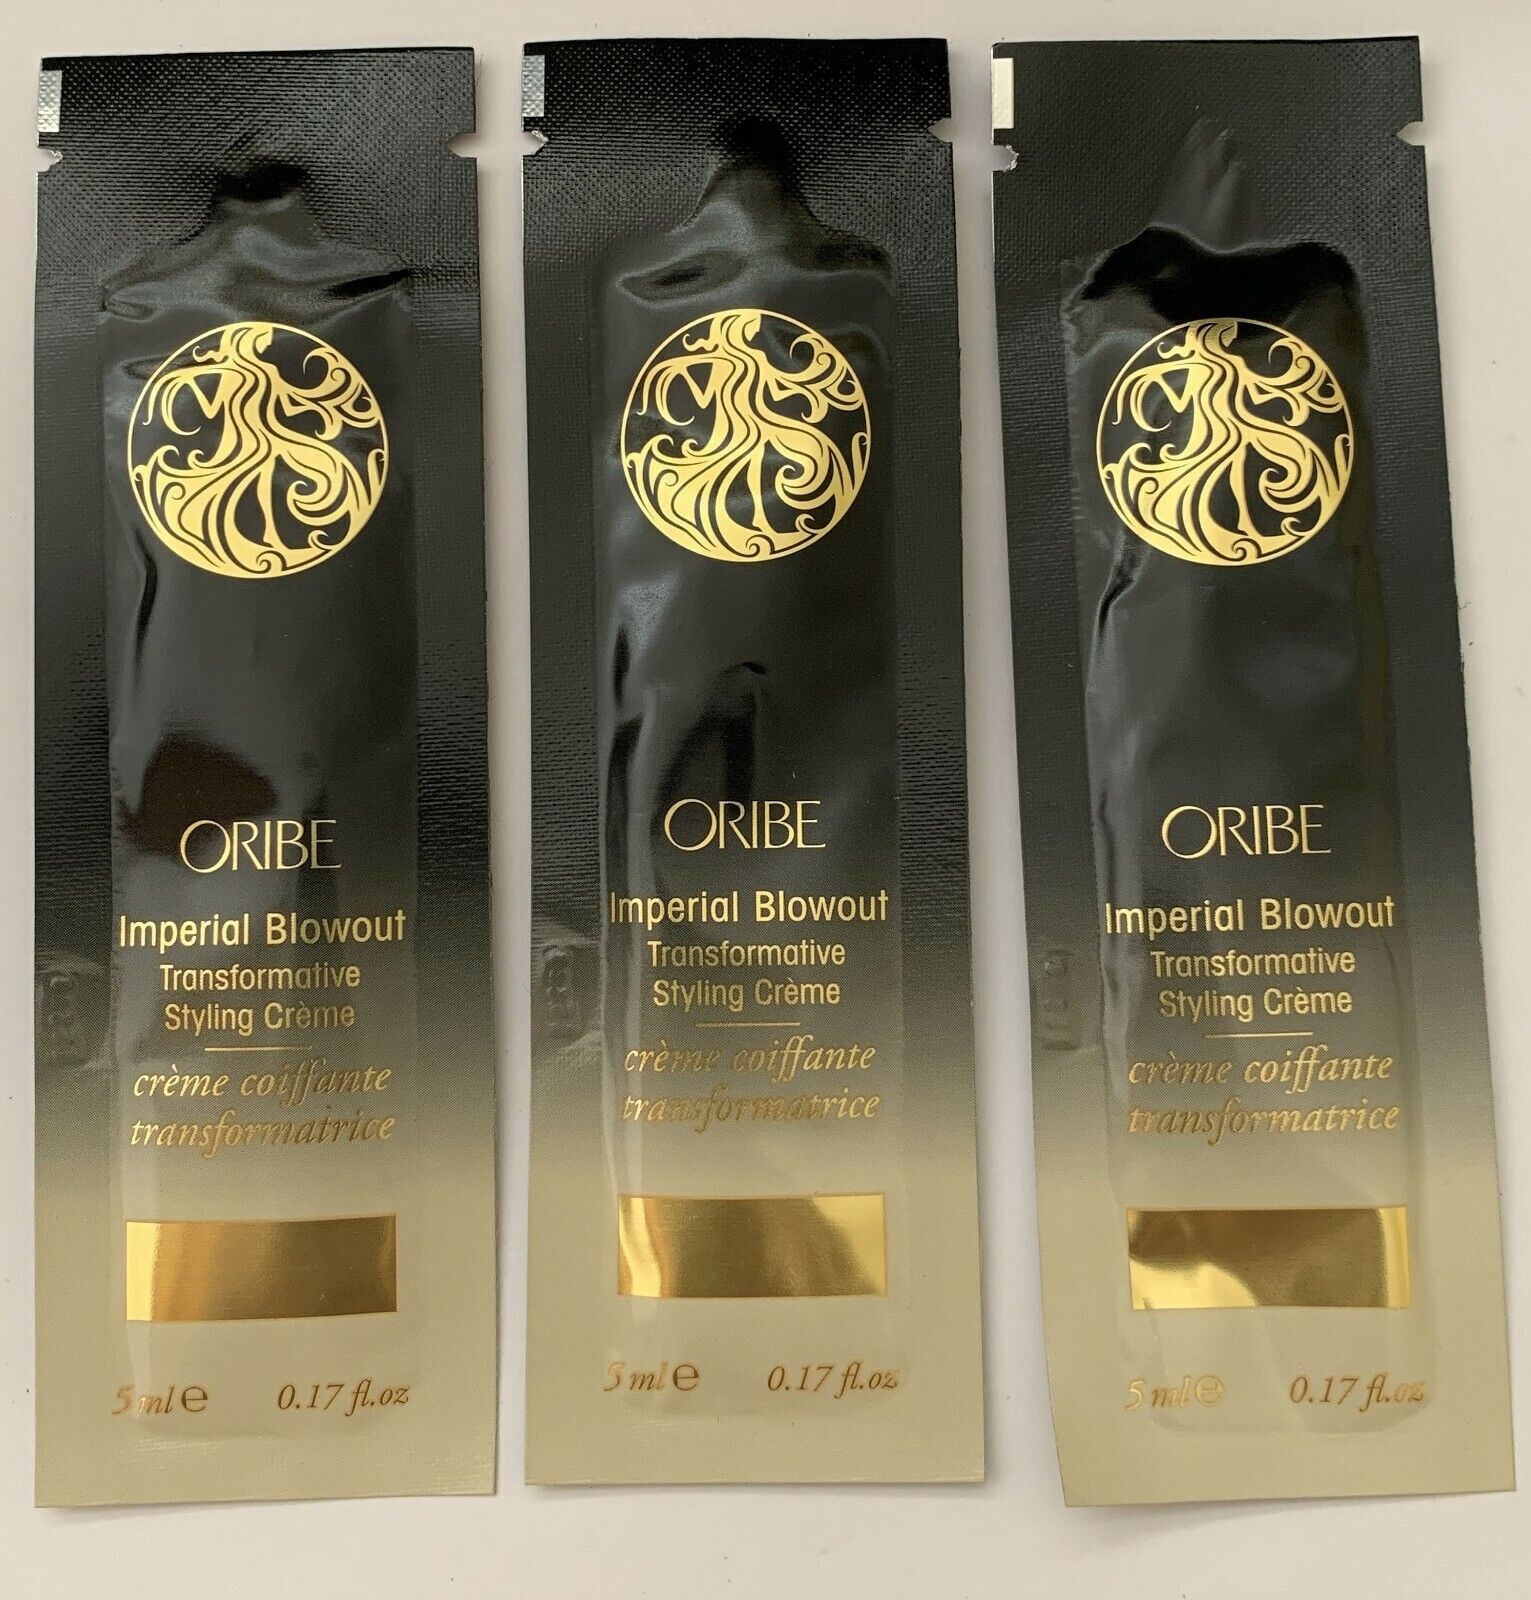 (3) ORIBE   Imperial Blowout Transformative Styling Creme - SAMPLE SIZE PACKETS